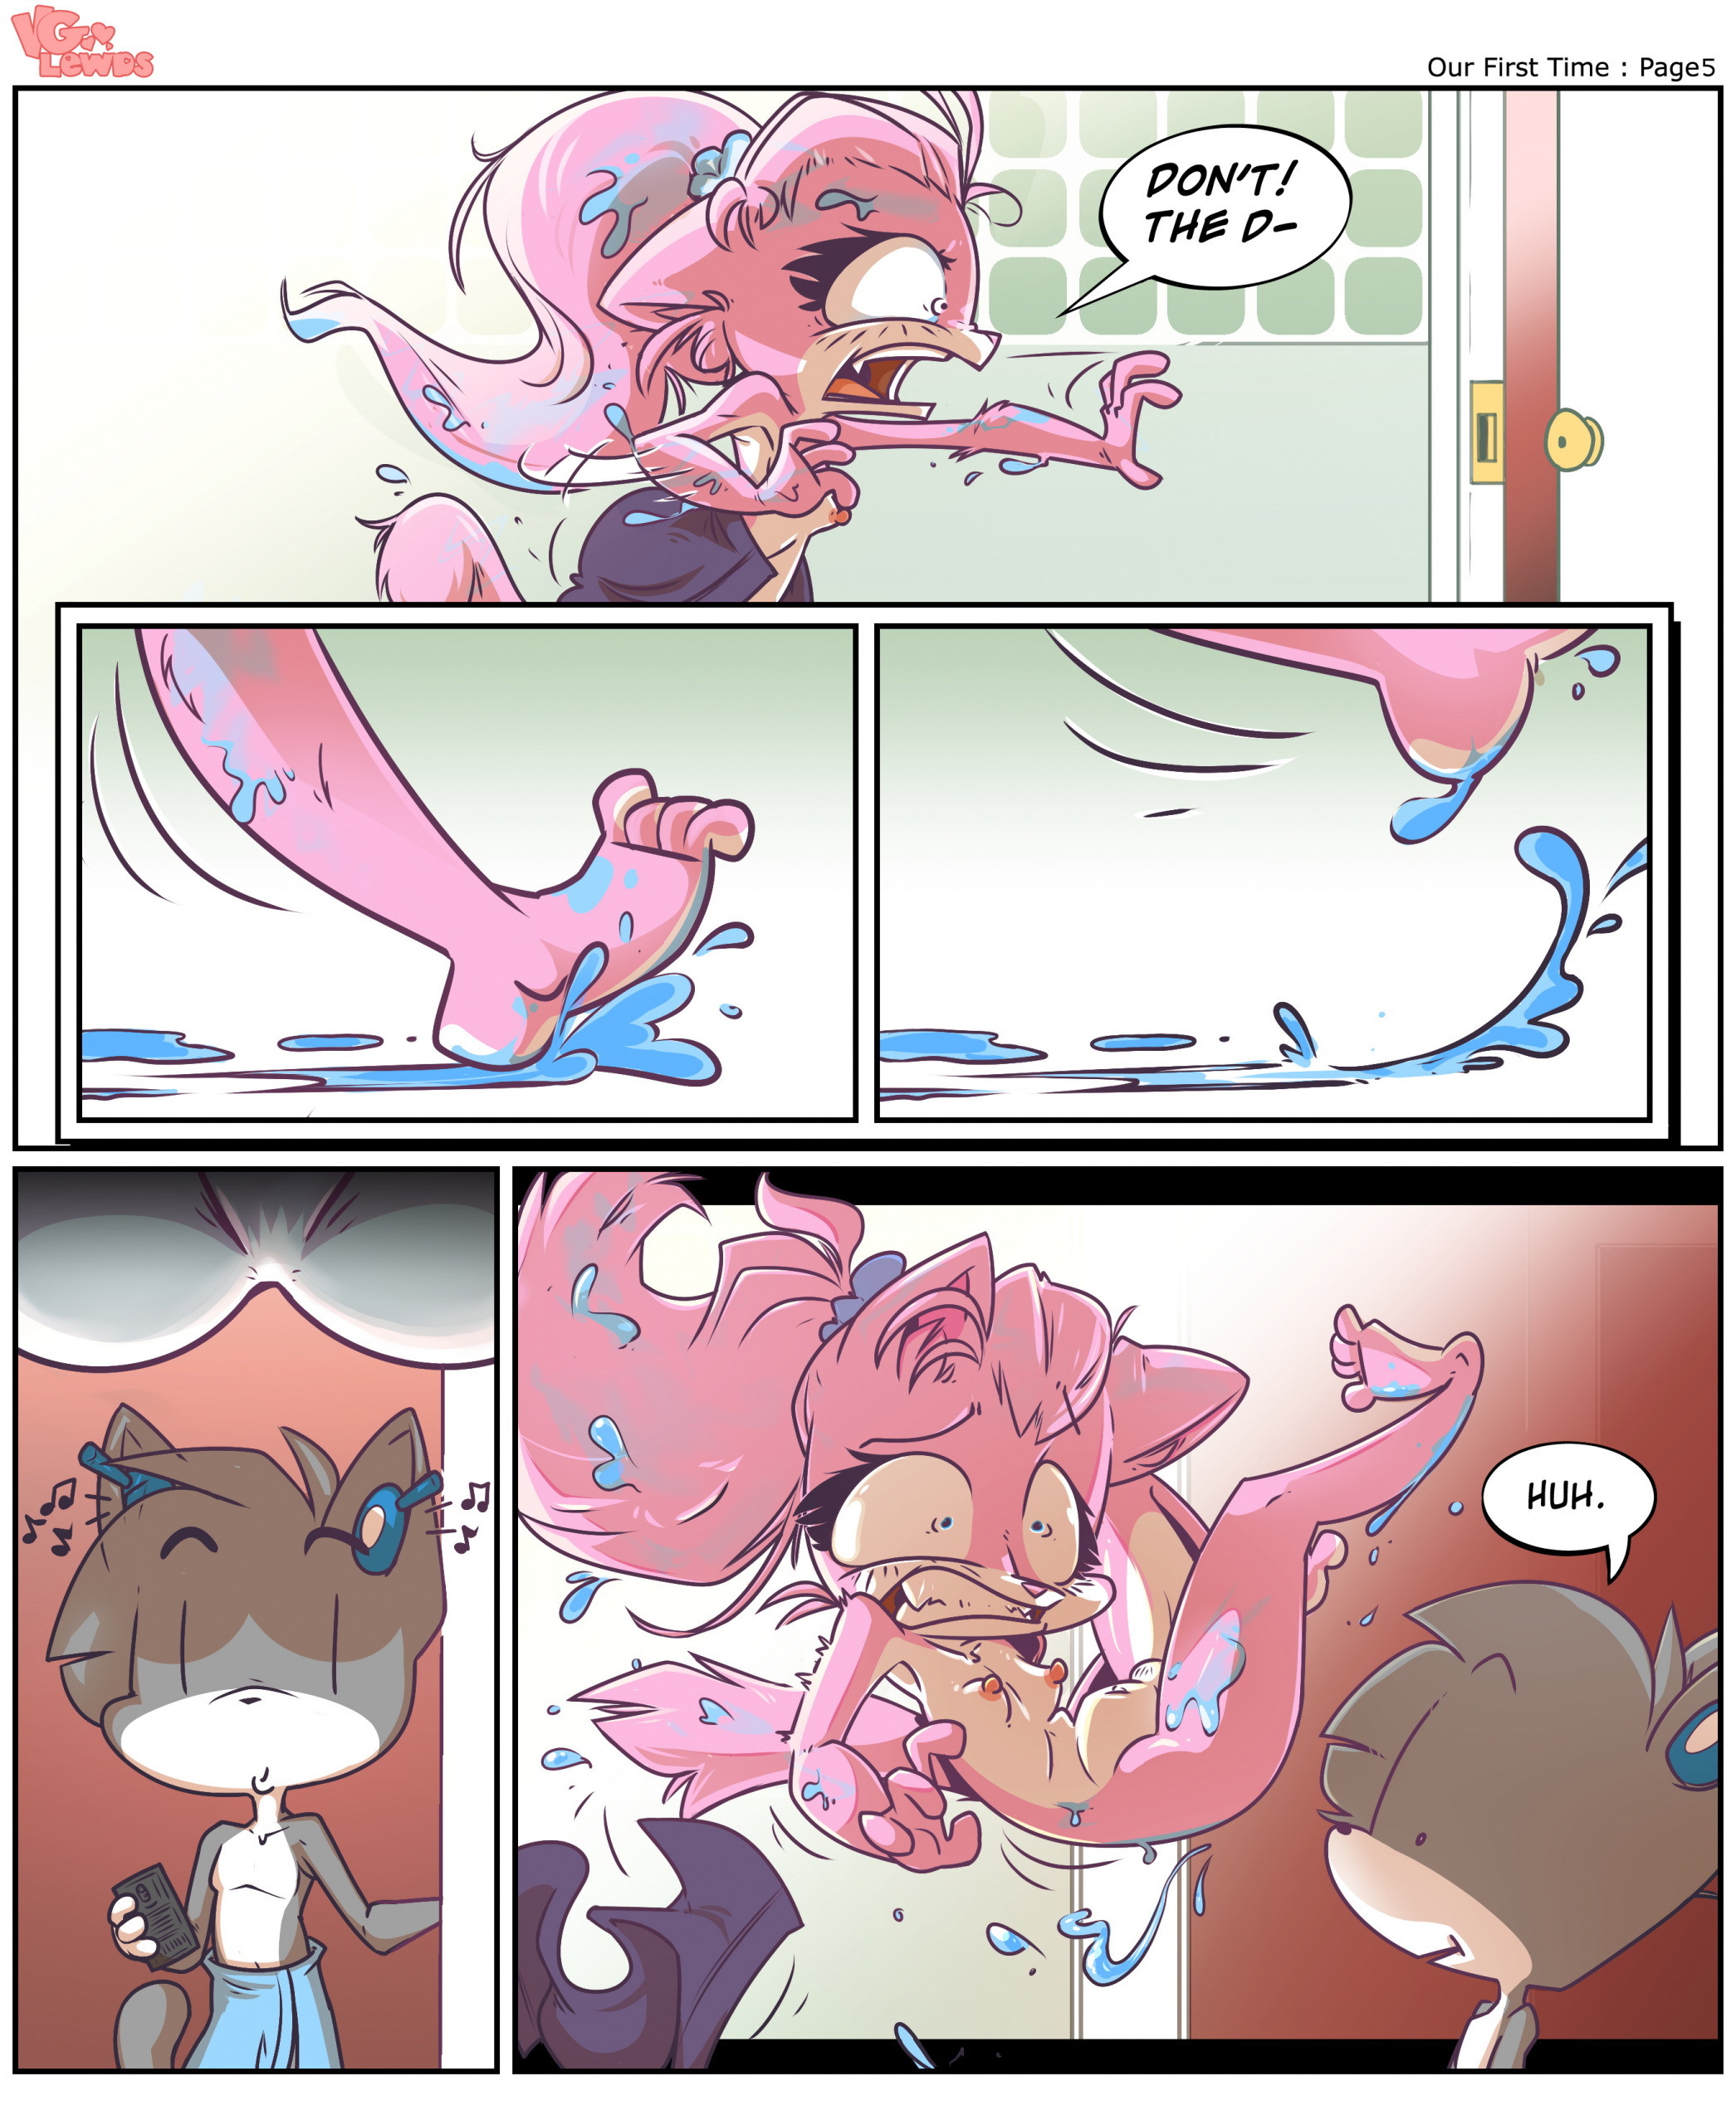 Our First Time - Page 5